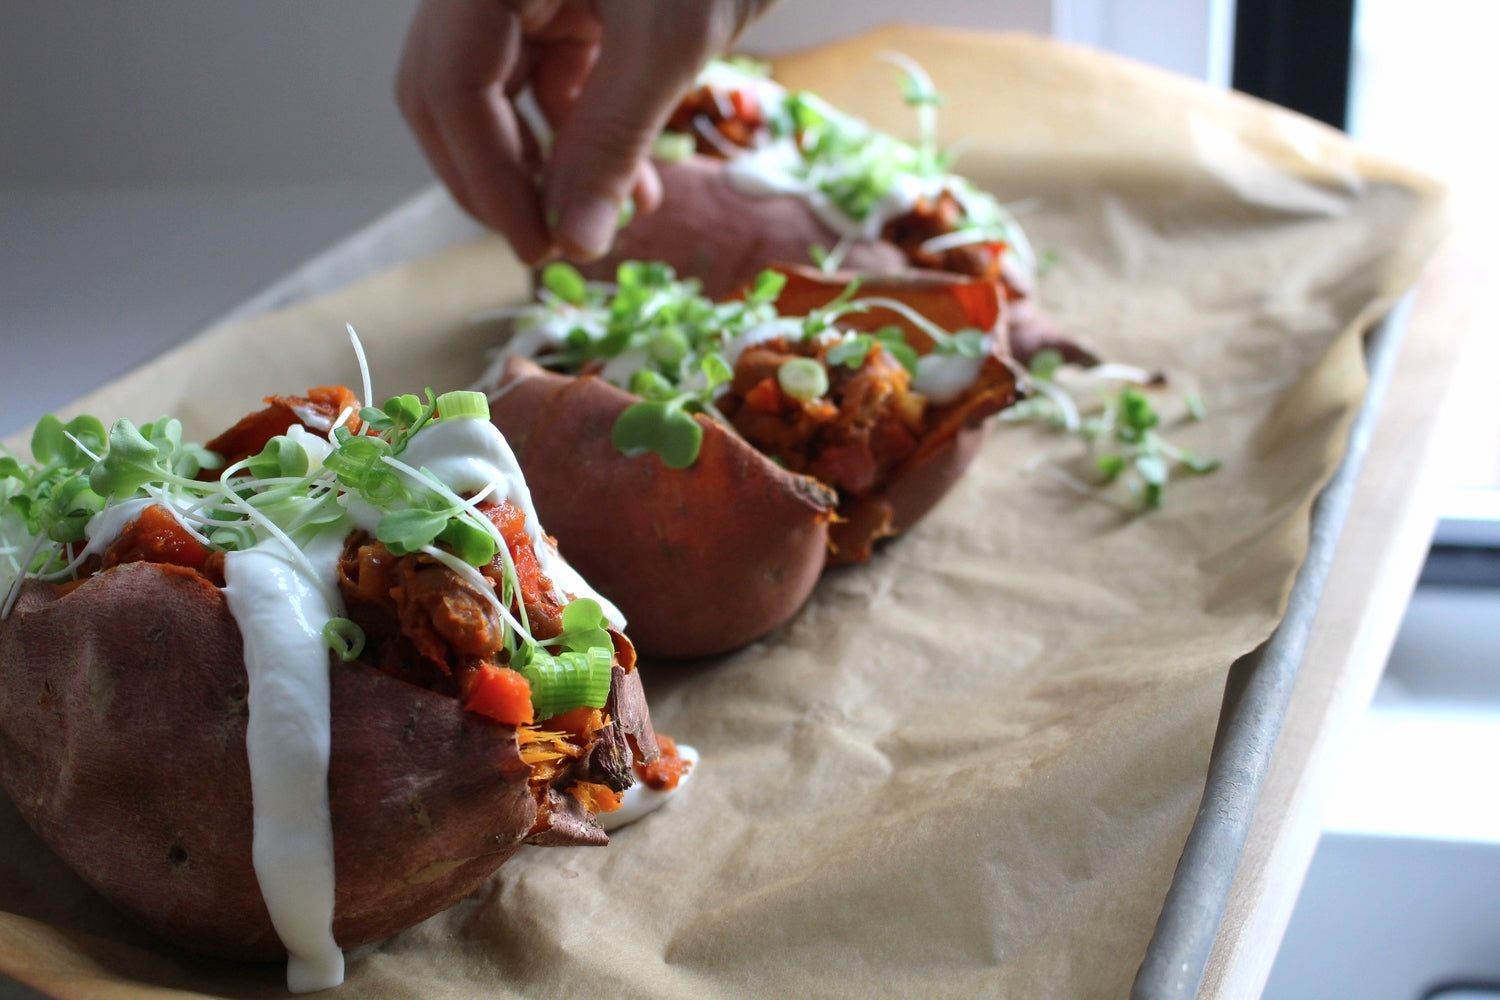 Stuffed Sweet Potato with Sour Cream, Sprouts Avocado 